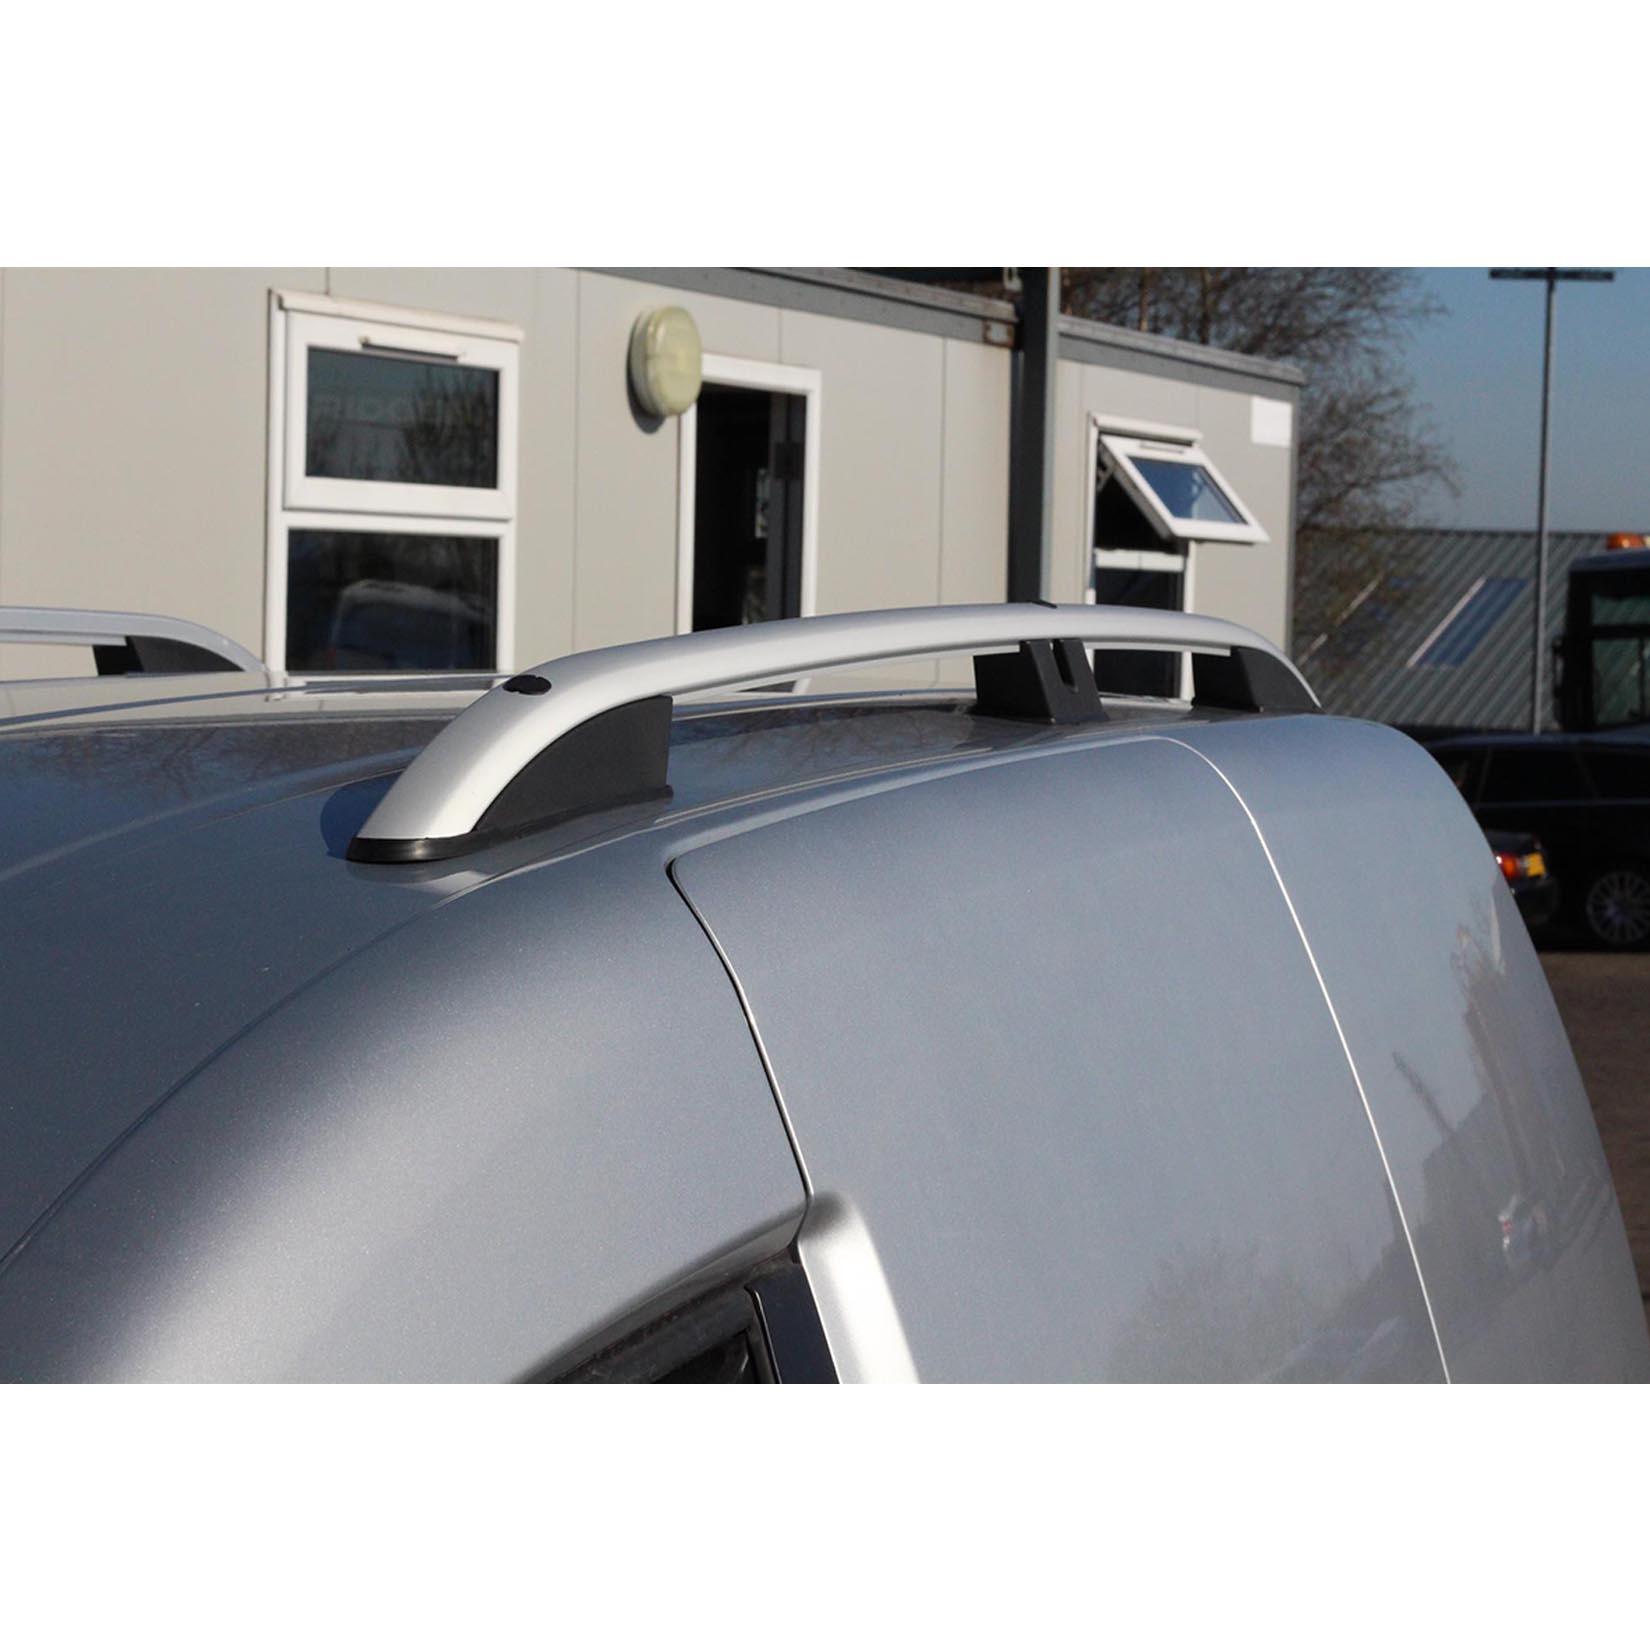 VW CADDY 2010-2020 SWB ALUMINIUM ROOF BARS IN SILVER - Storm Xccessories2